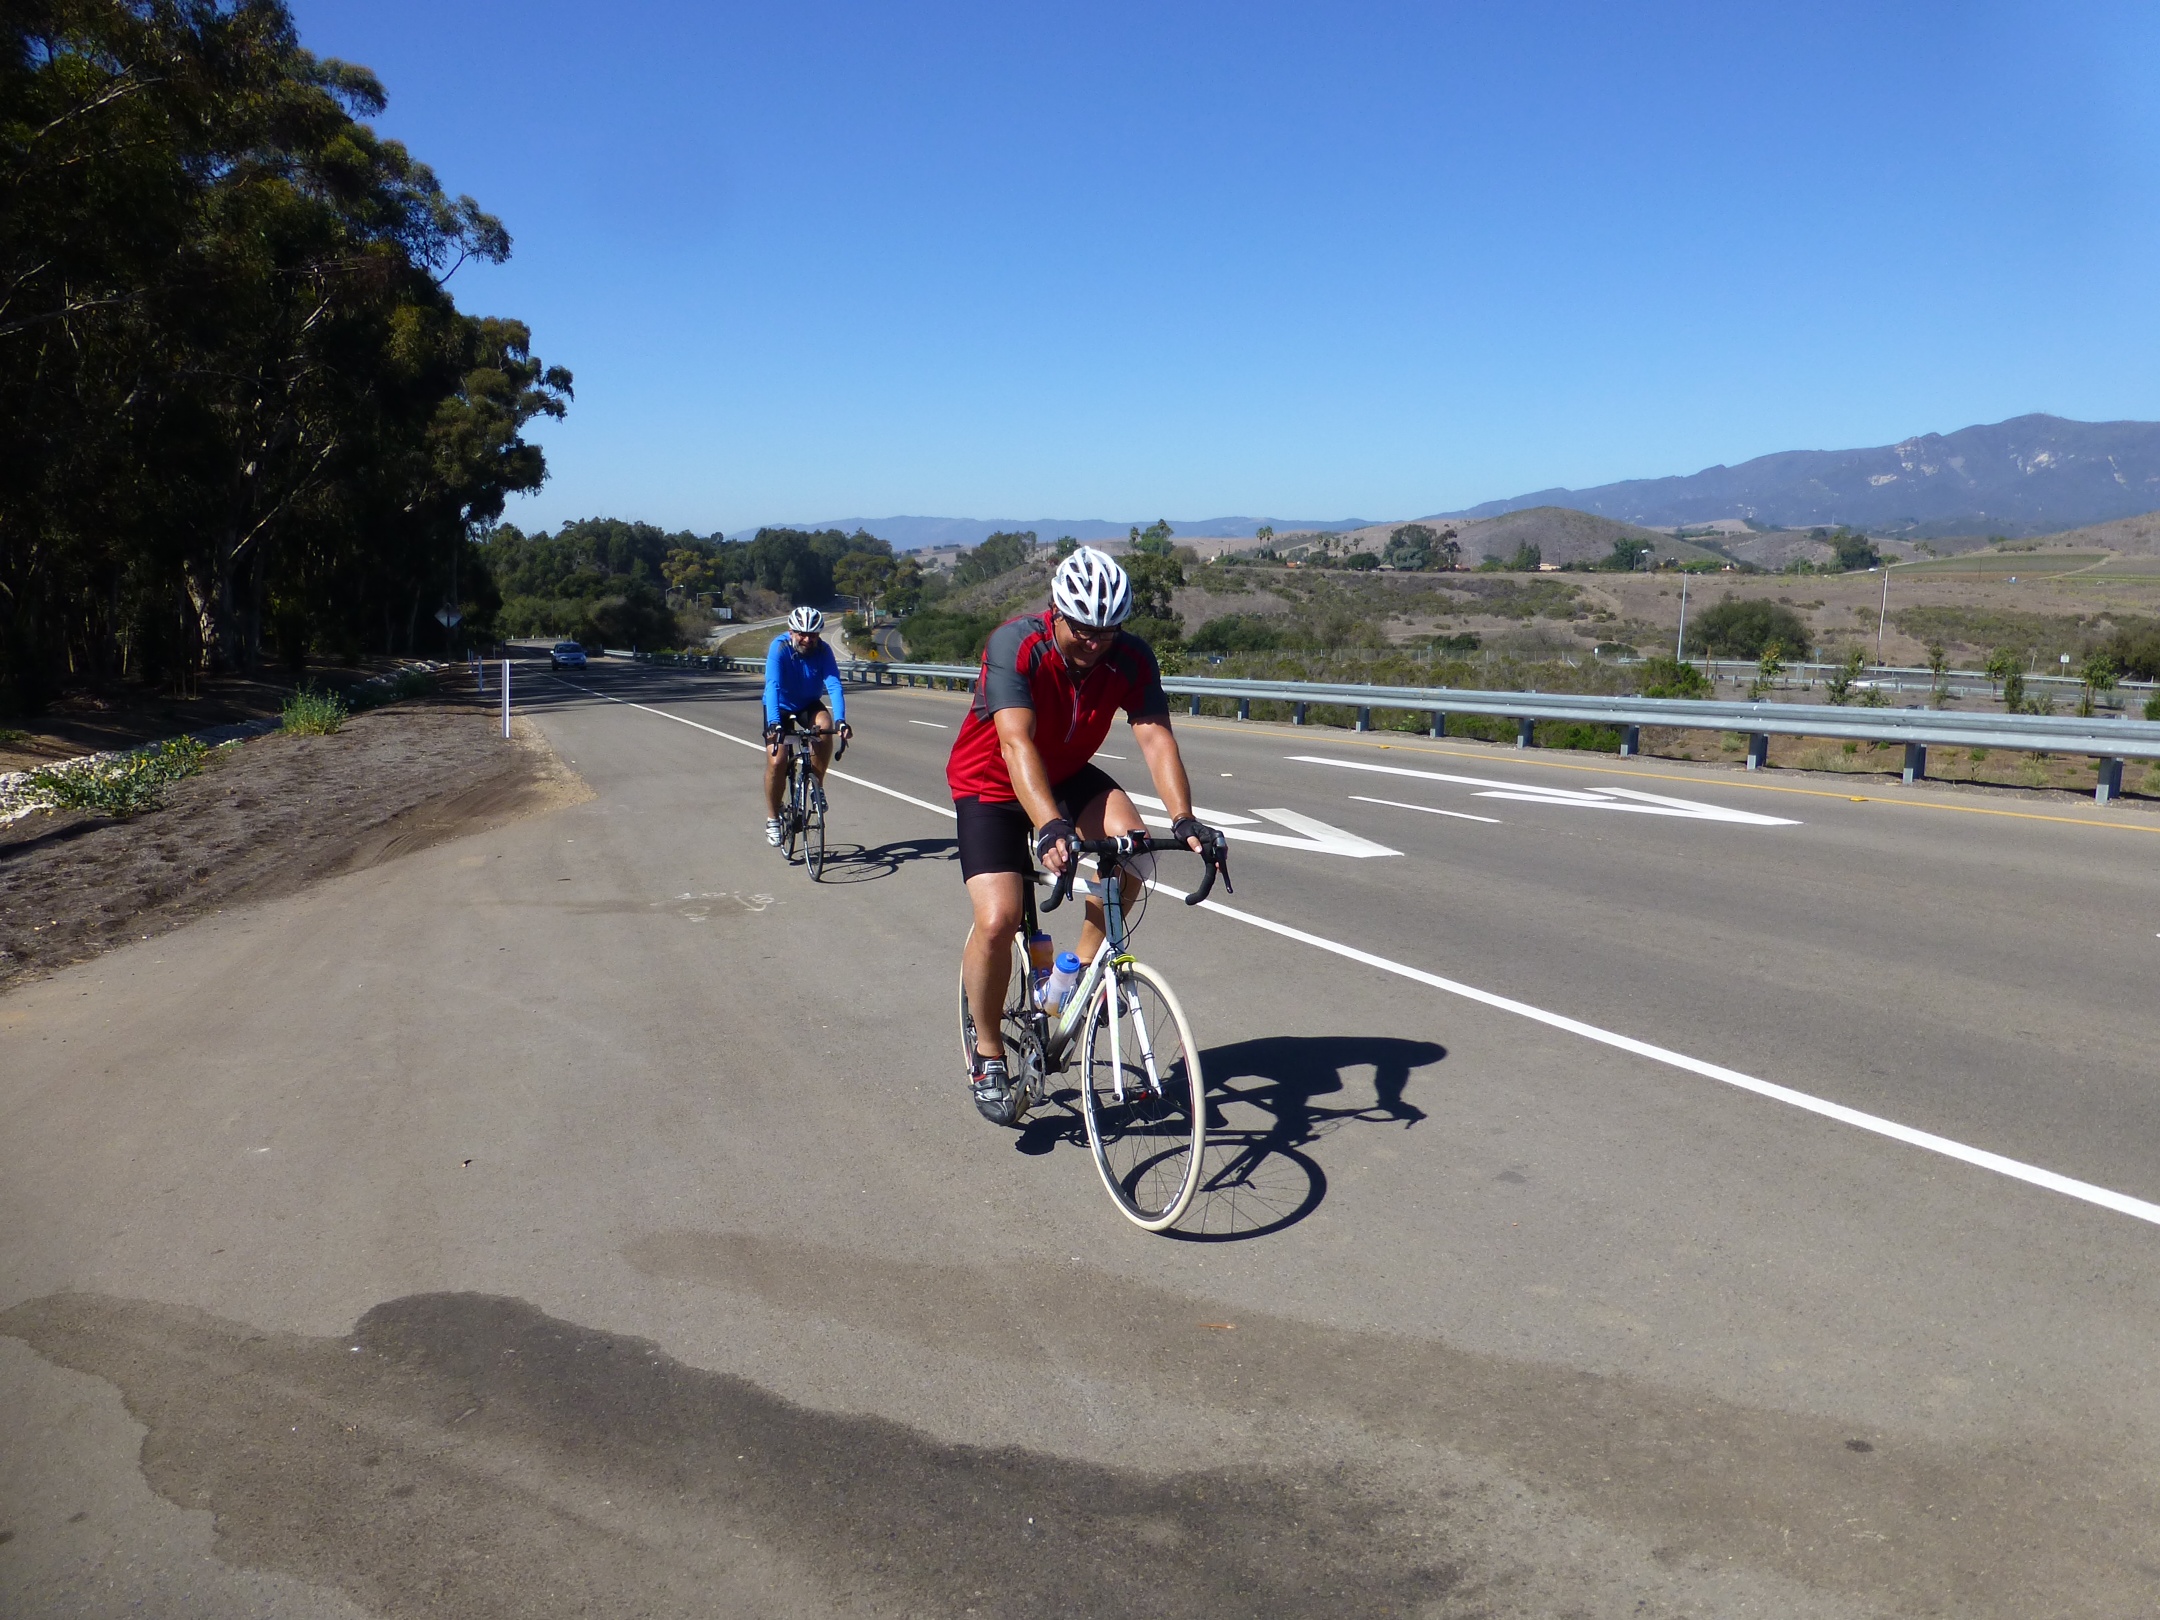 Day 7 – Tuesday 16 October – Lompoc to Ventura